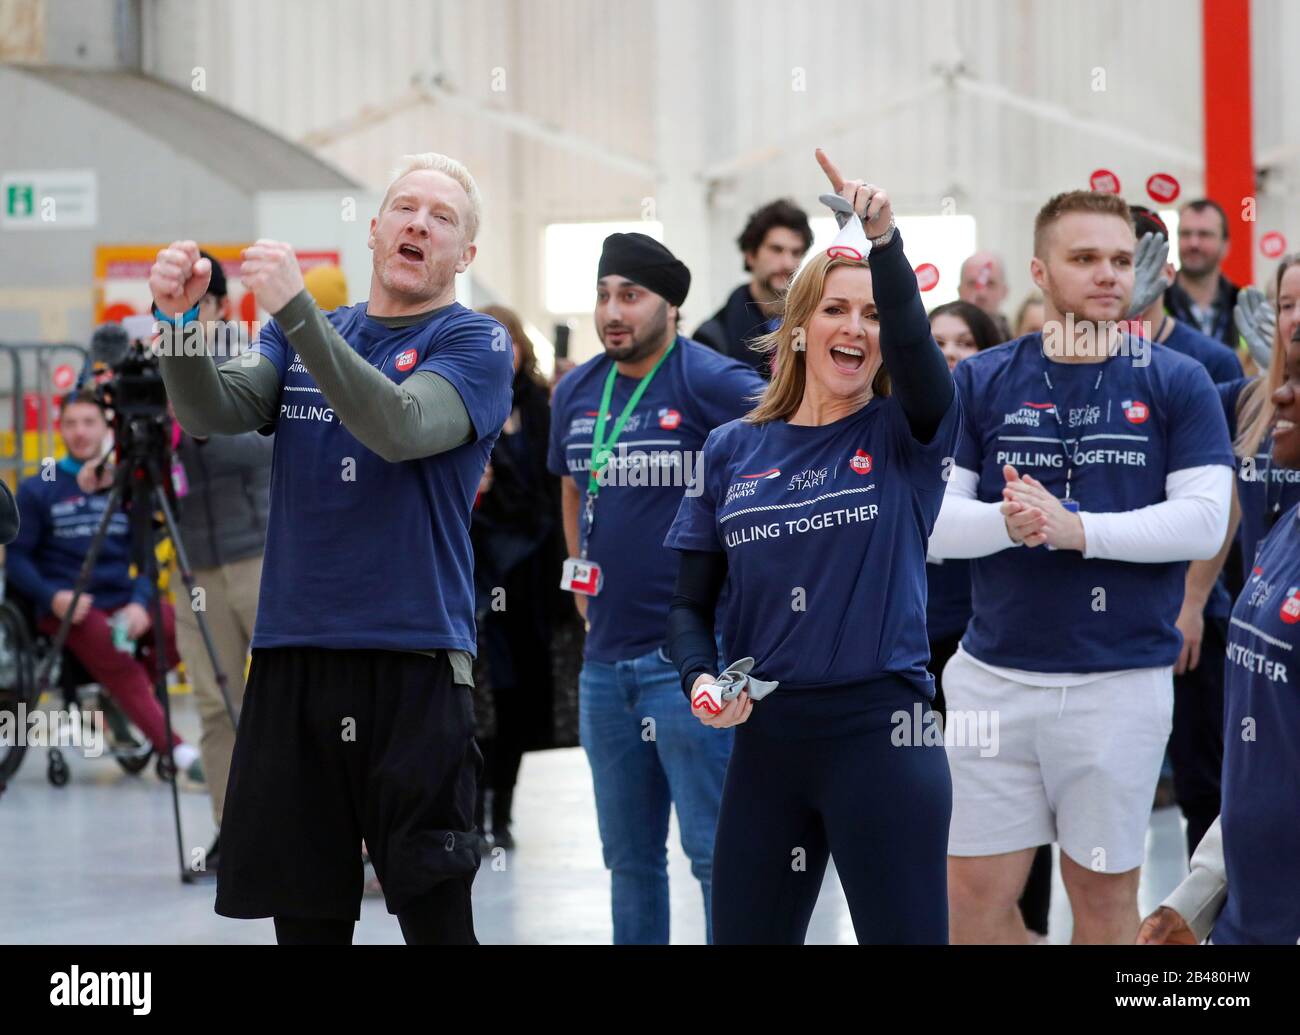 Iwan Thomas (left) and Gabby Logan wait to join members of staff in an attempt to break the Guinness World Record for the heaviest 100m A350 plane pull during a Sport Relief event at Heathrow Airport in London. Stock Photo